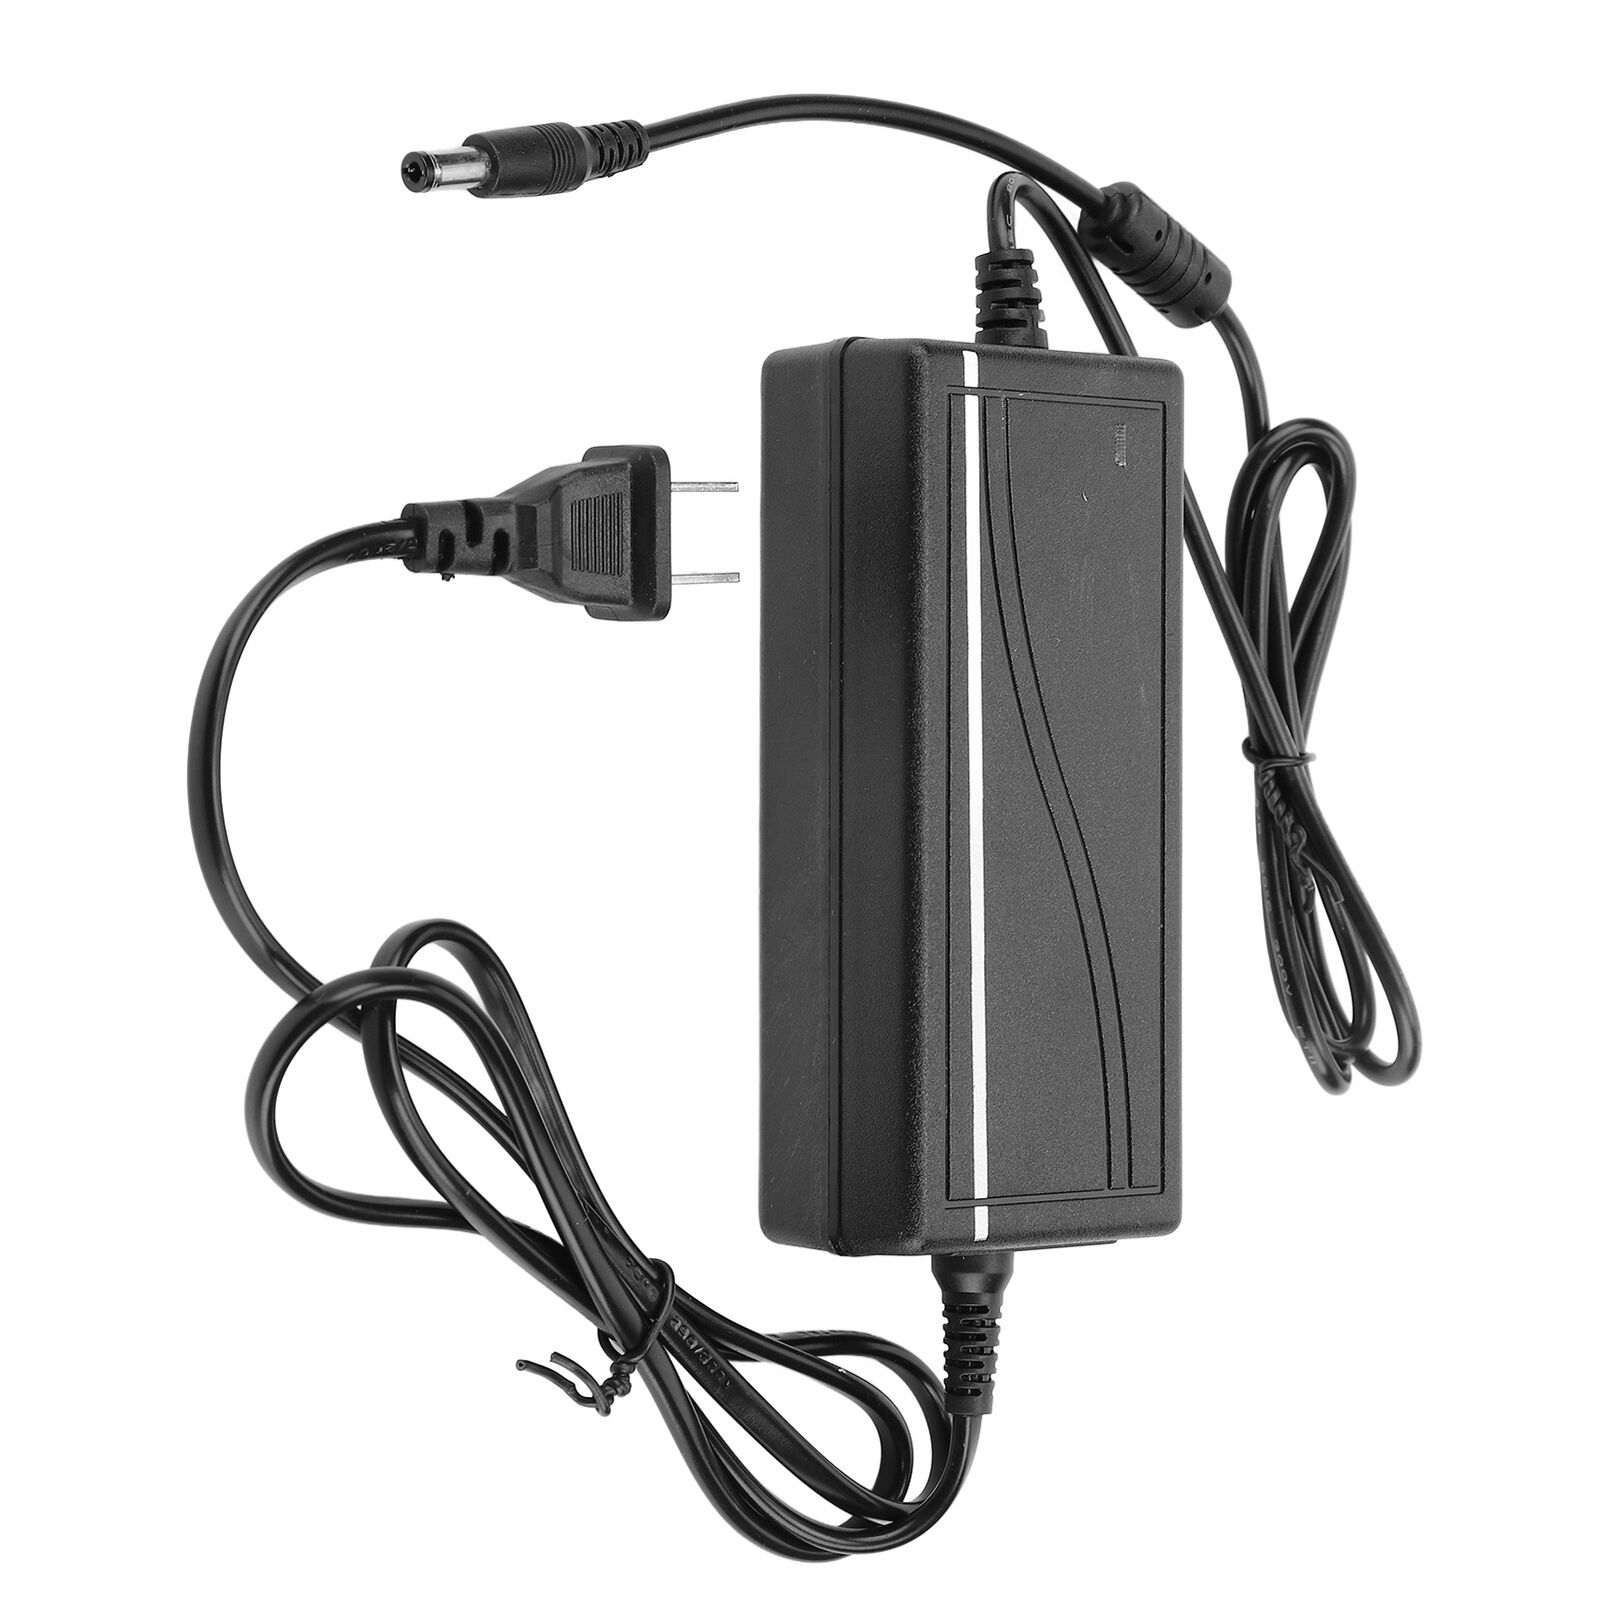 Clipper Power Adapter US Plug 100240V Clipper Power Cord For CRV 20001 For Feature: 1. Enough Cable Length: This cutti